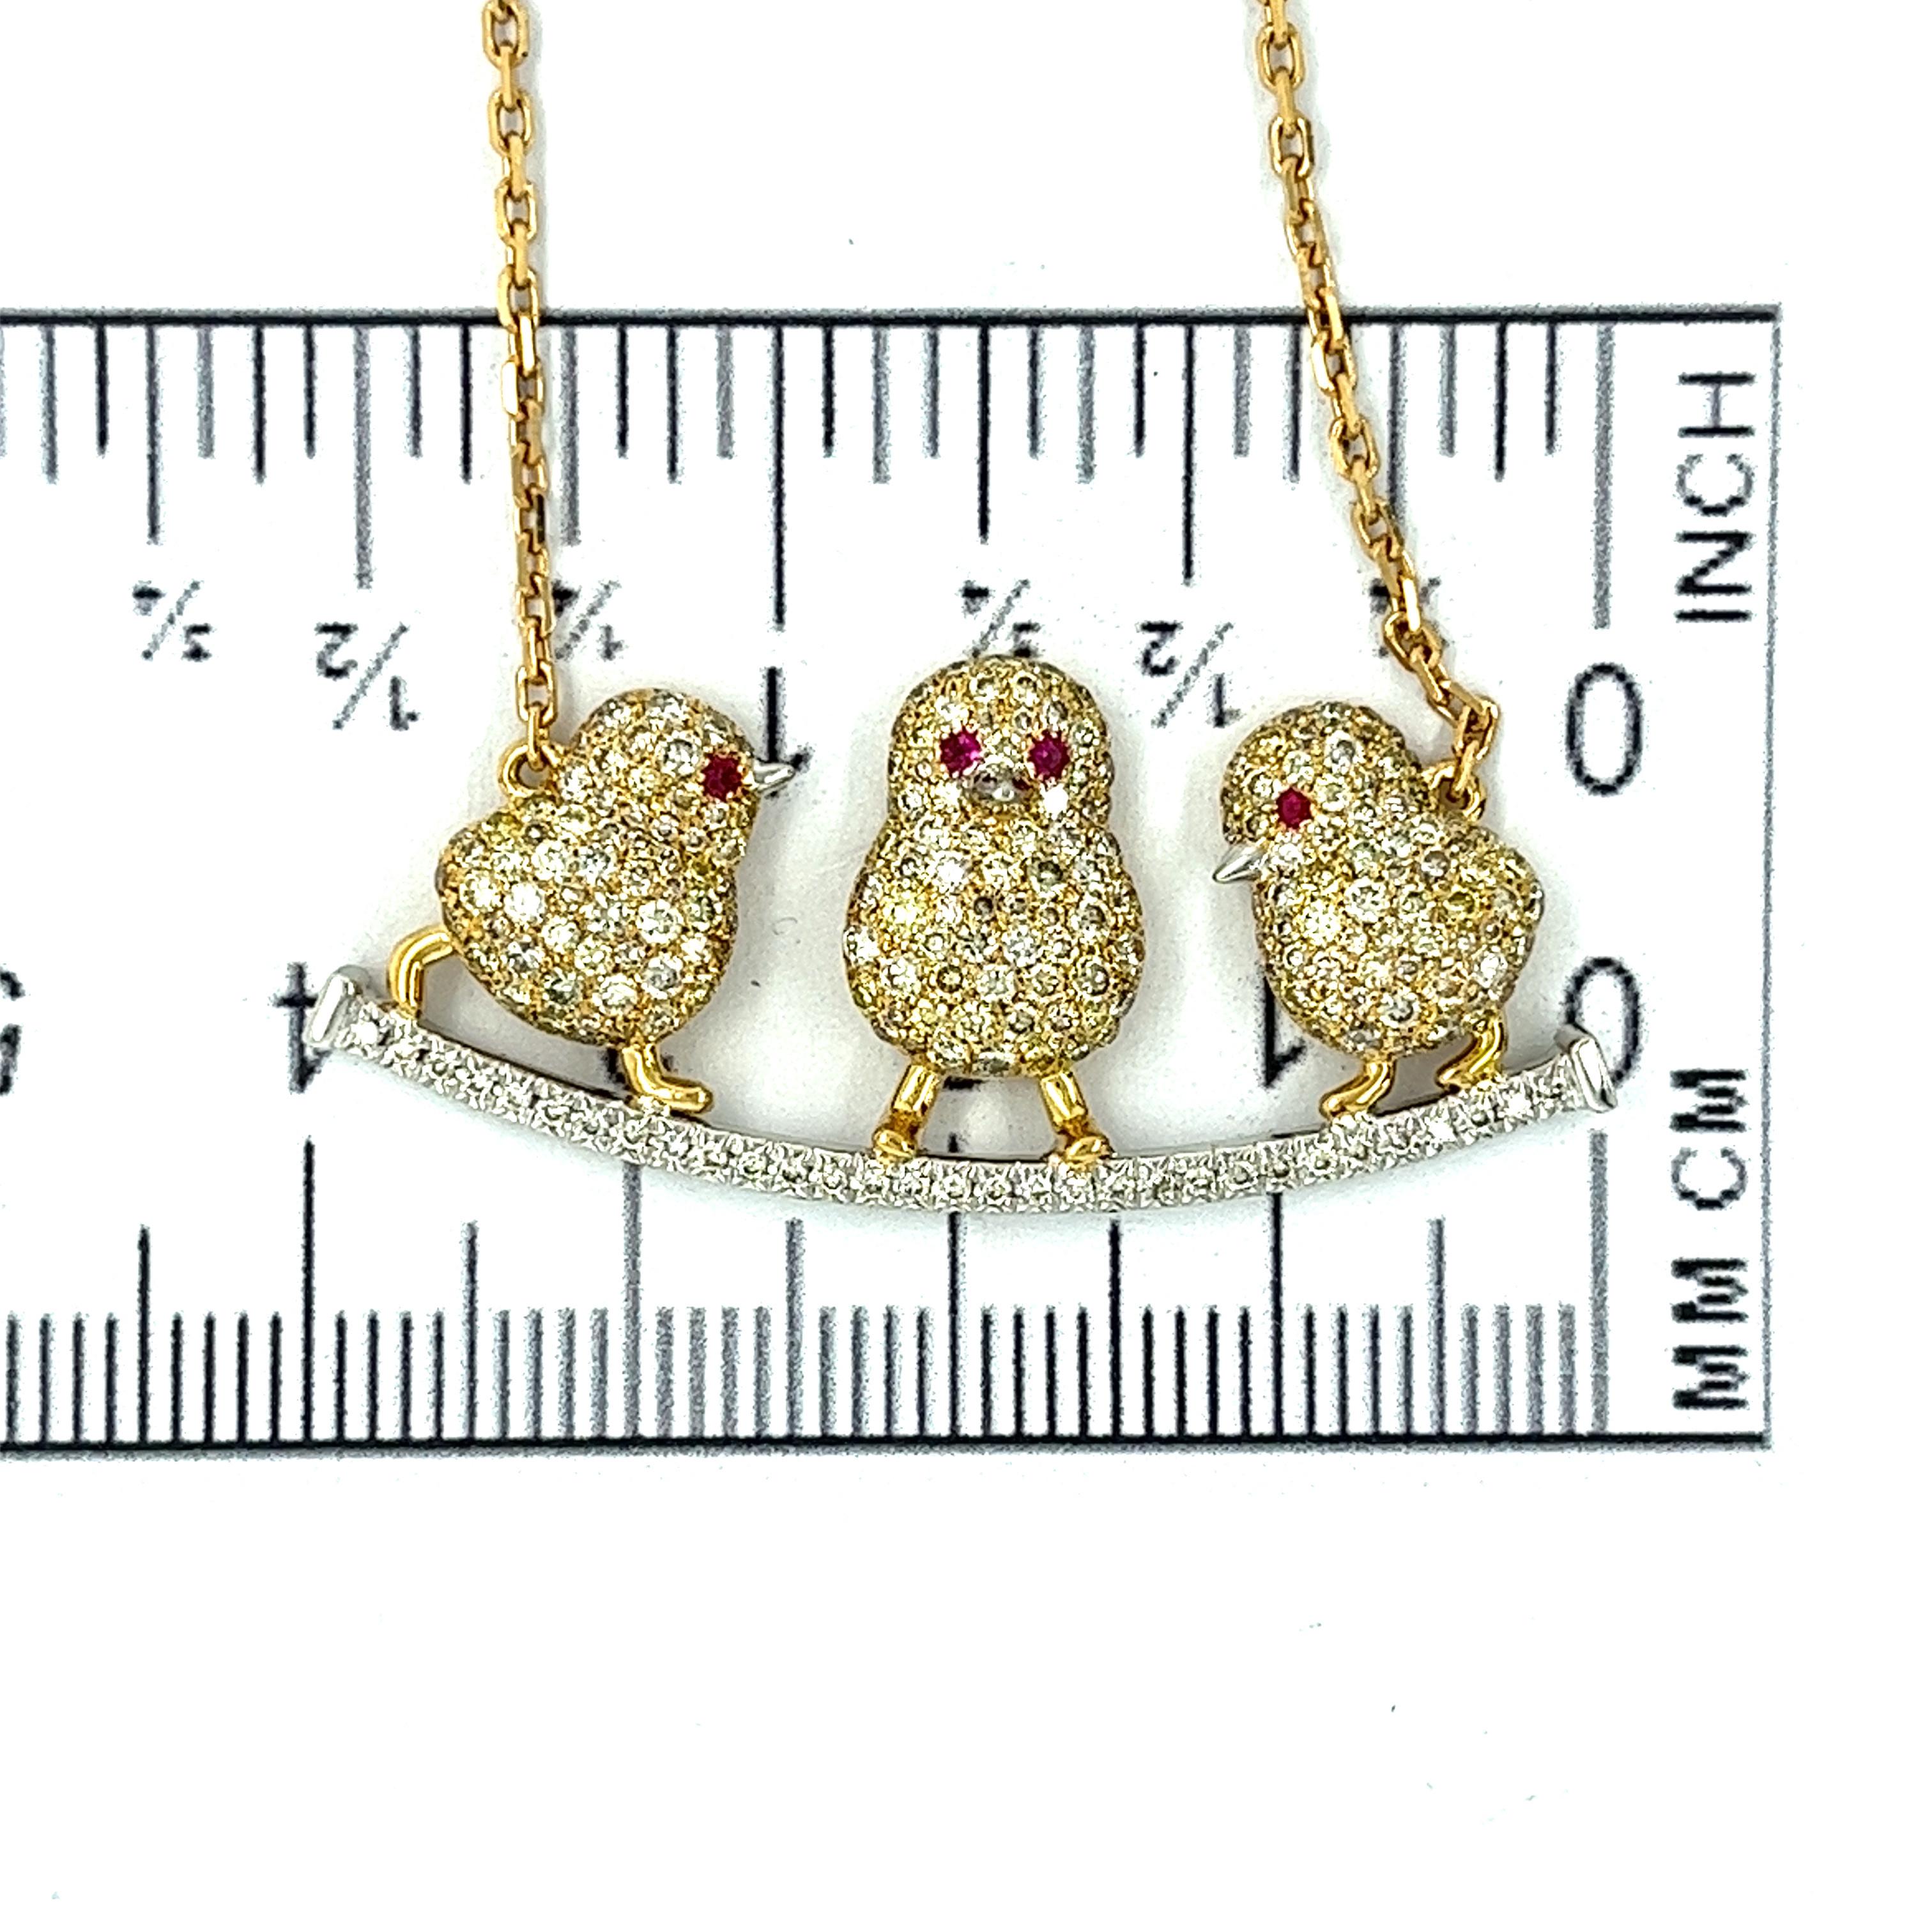 Chicks Necklace with Diamonds & Rubies in 18K Yellow Gold

31 Diamonds 0.14 CT
196 Fancy Diamonds 1.62CT
4 Bubies 0.05 CT
18 K Yellow Gold 7.84 GM

Cute little animals always make people feel warm, but this chicken necklace made of precious diamonds